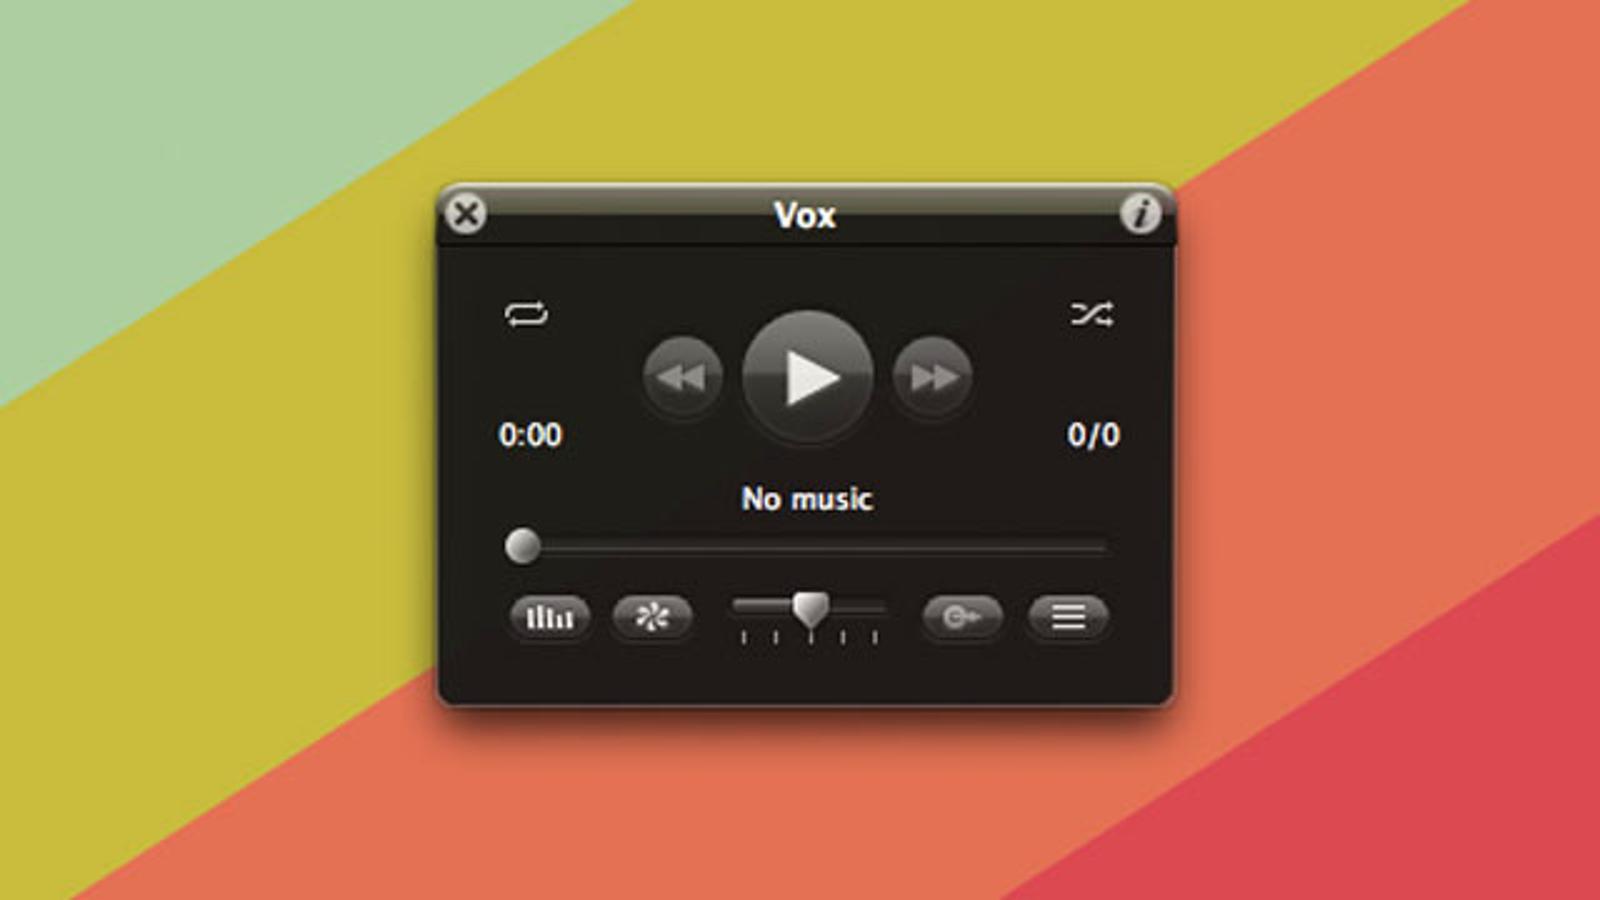 download vox player for mac